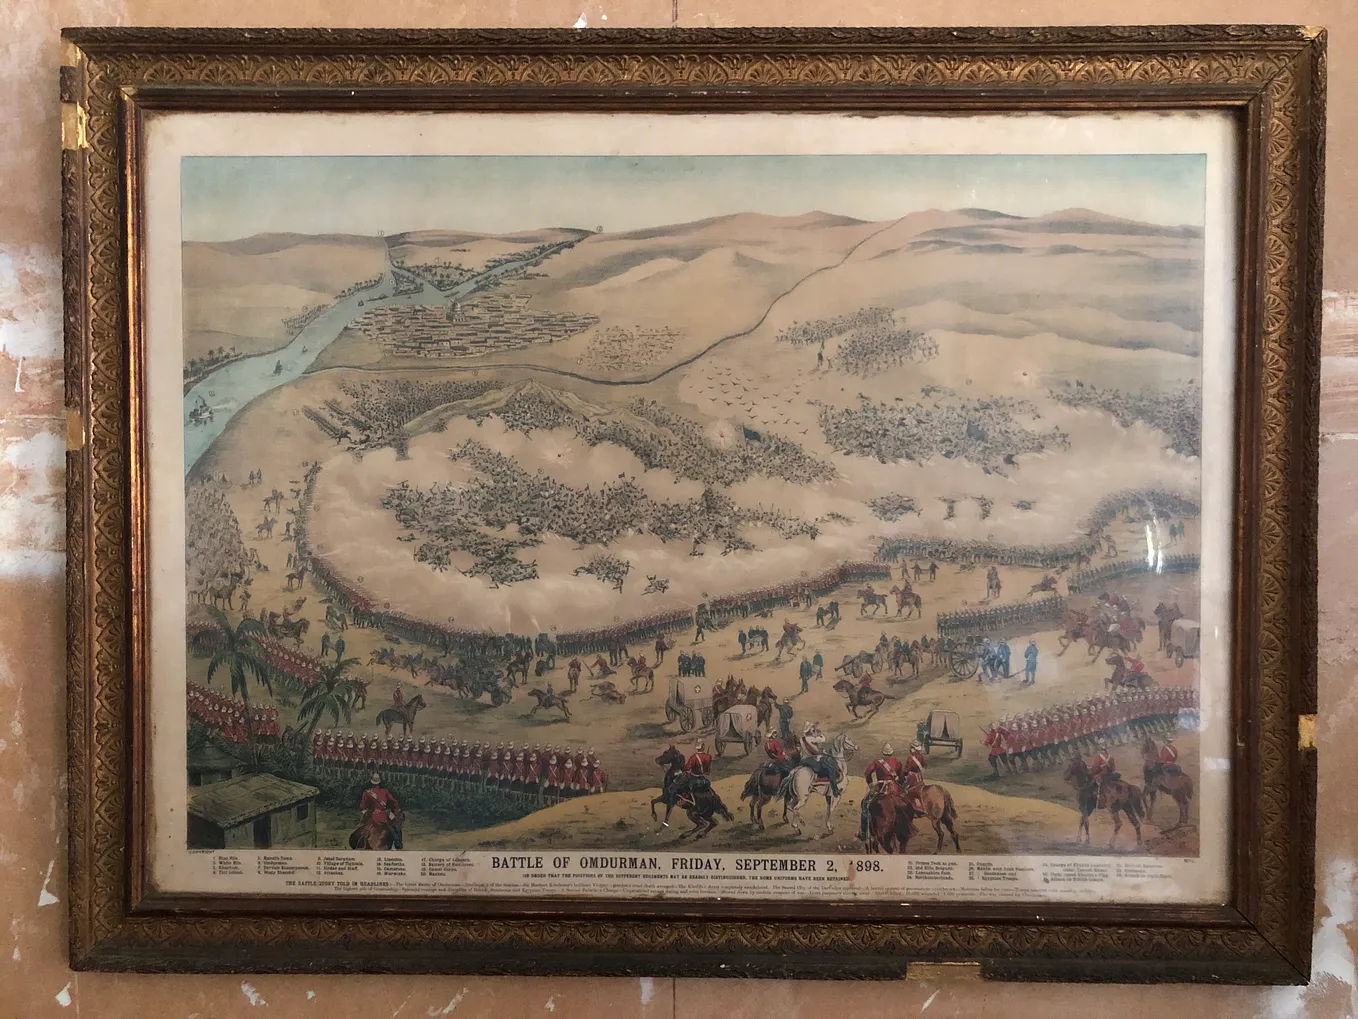 Antique picture of a battle in the desert in a gilt frame